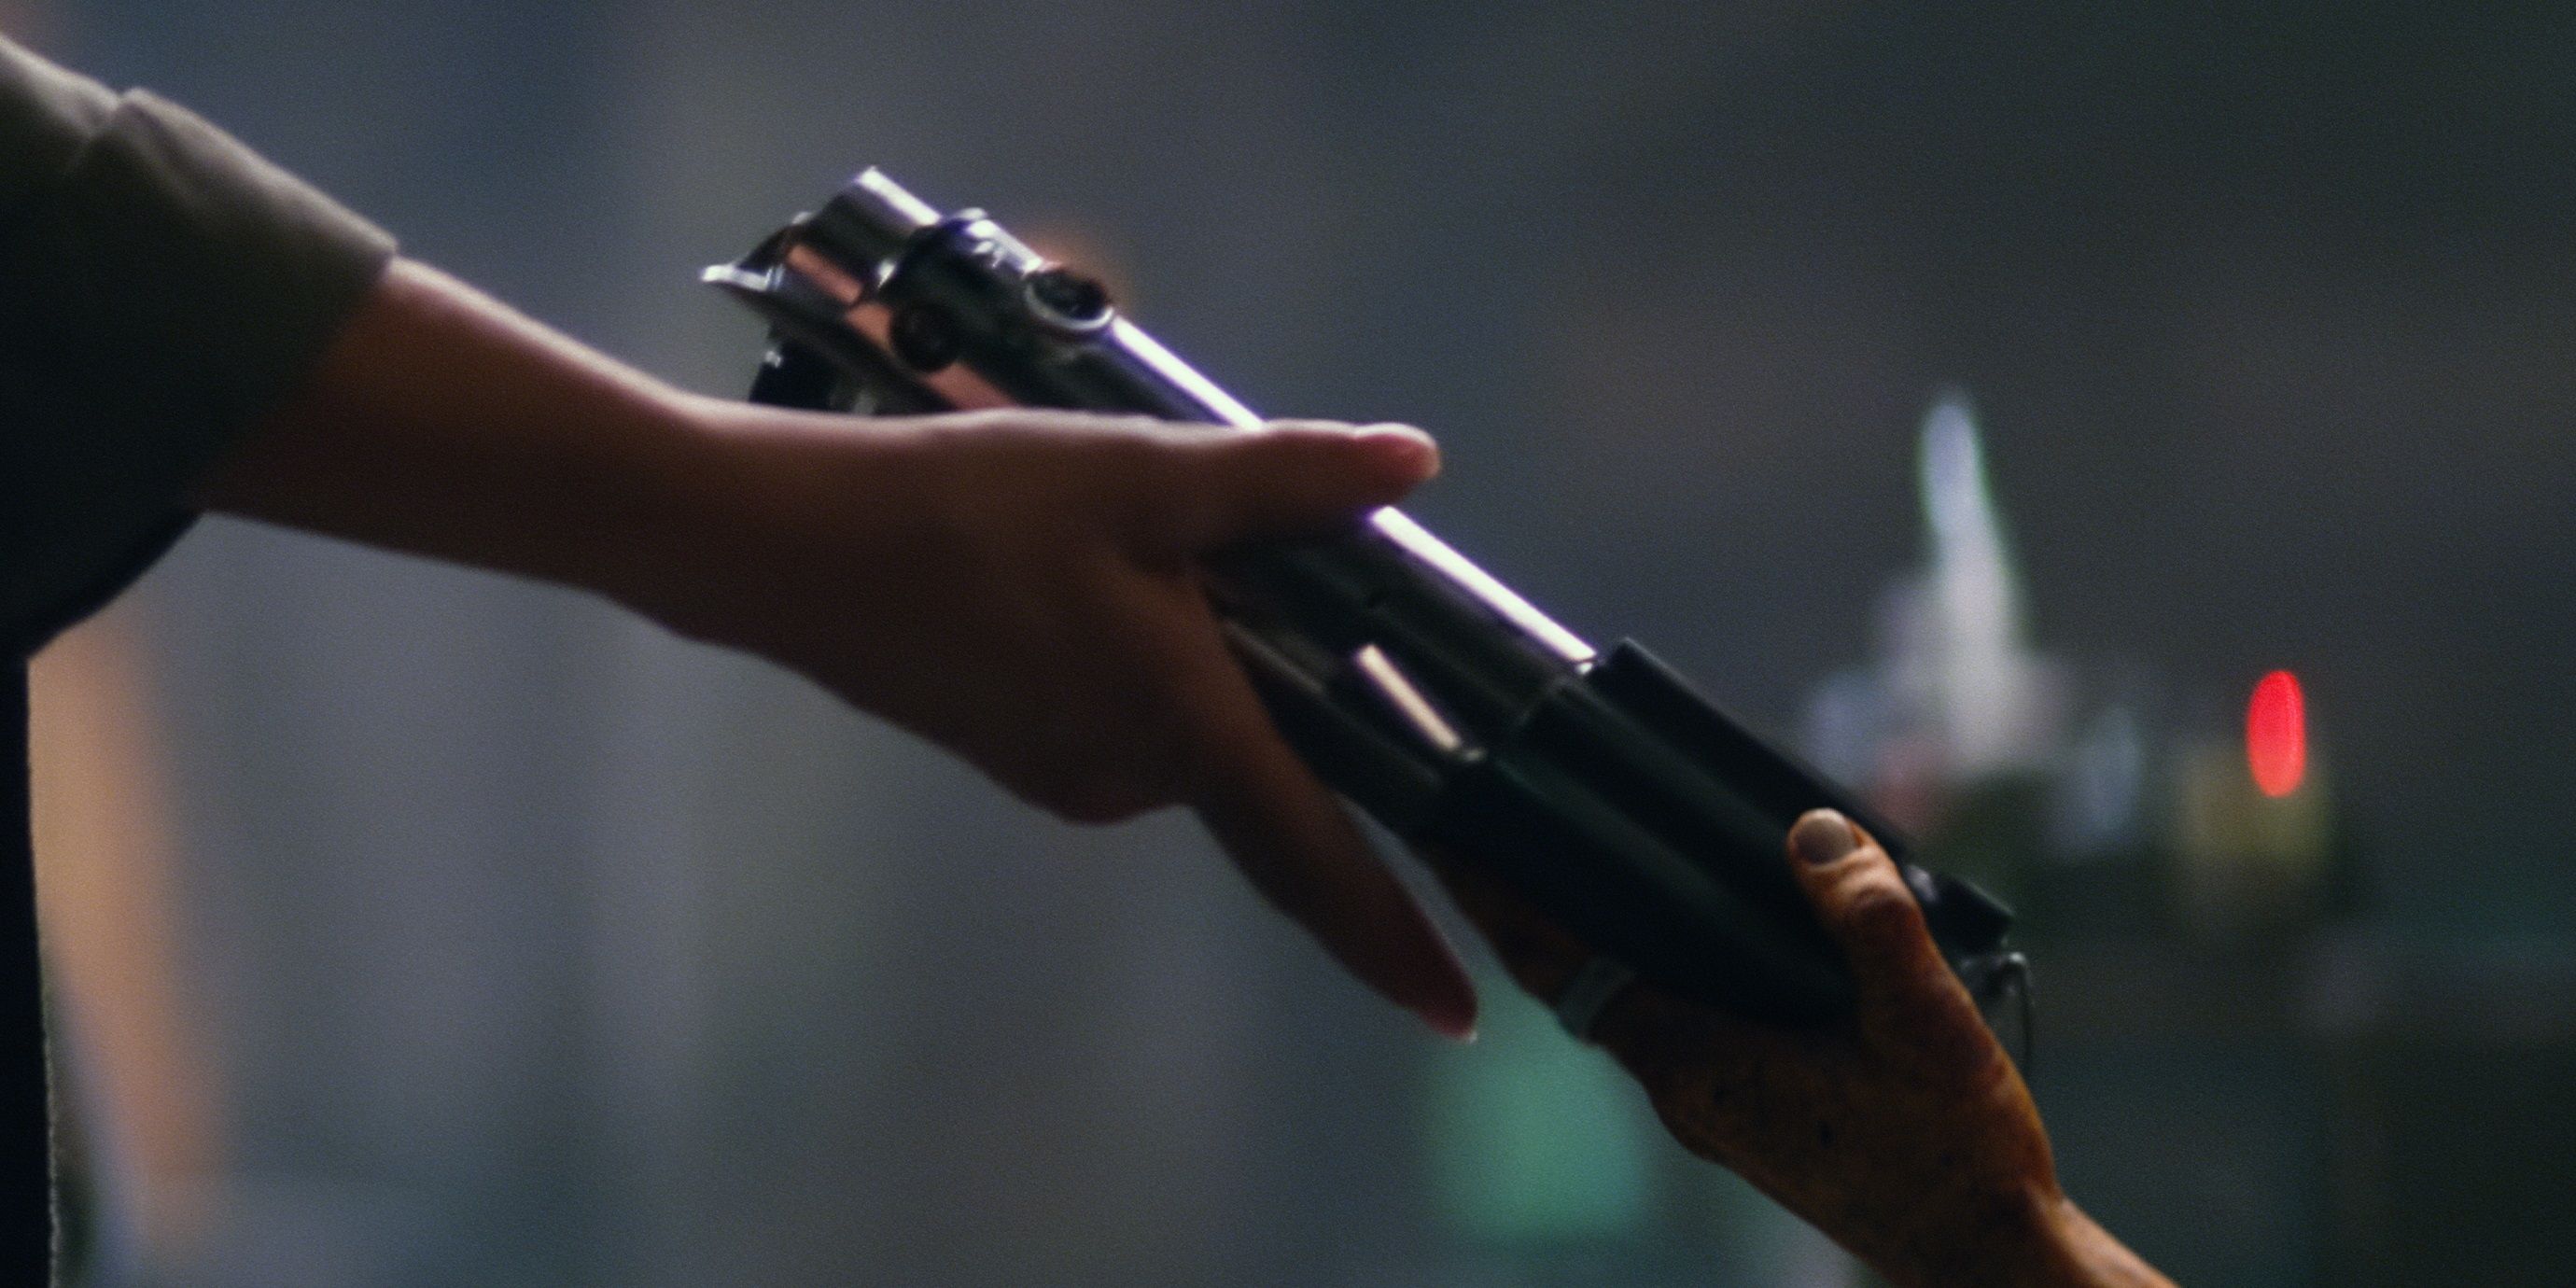 Rey takes Anakin's lightsaber in The Force Awakens